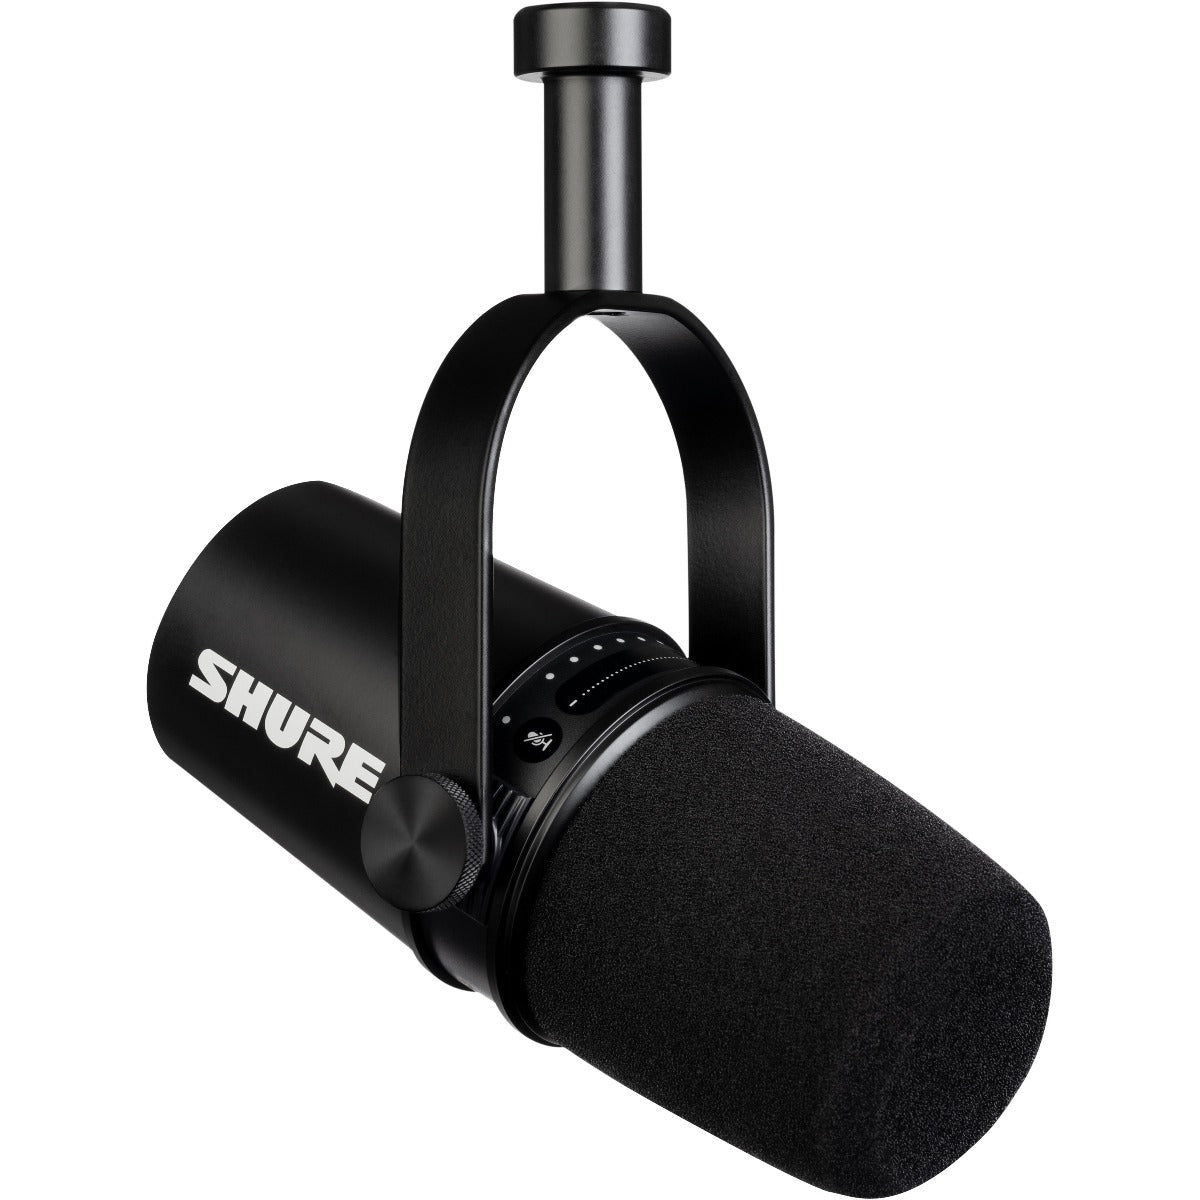 3/4 view of Shure MV7 Podcast Microphone - Black with integrated yoke in boom position showing front, top and left side